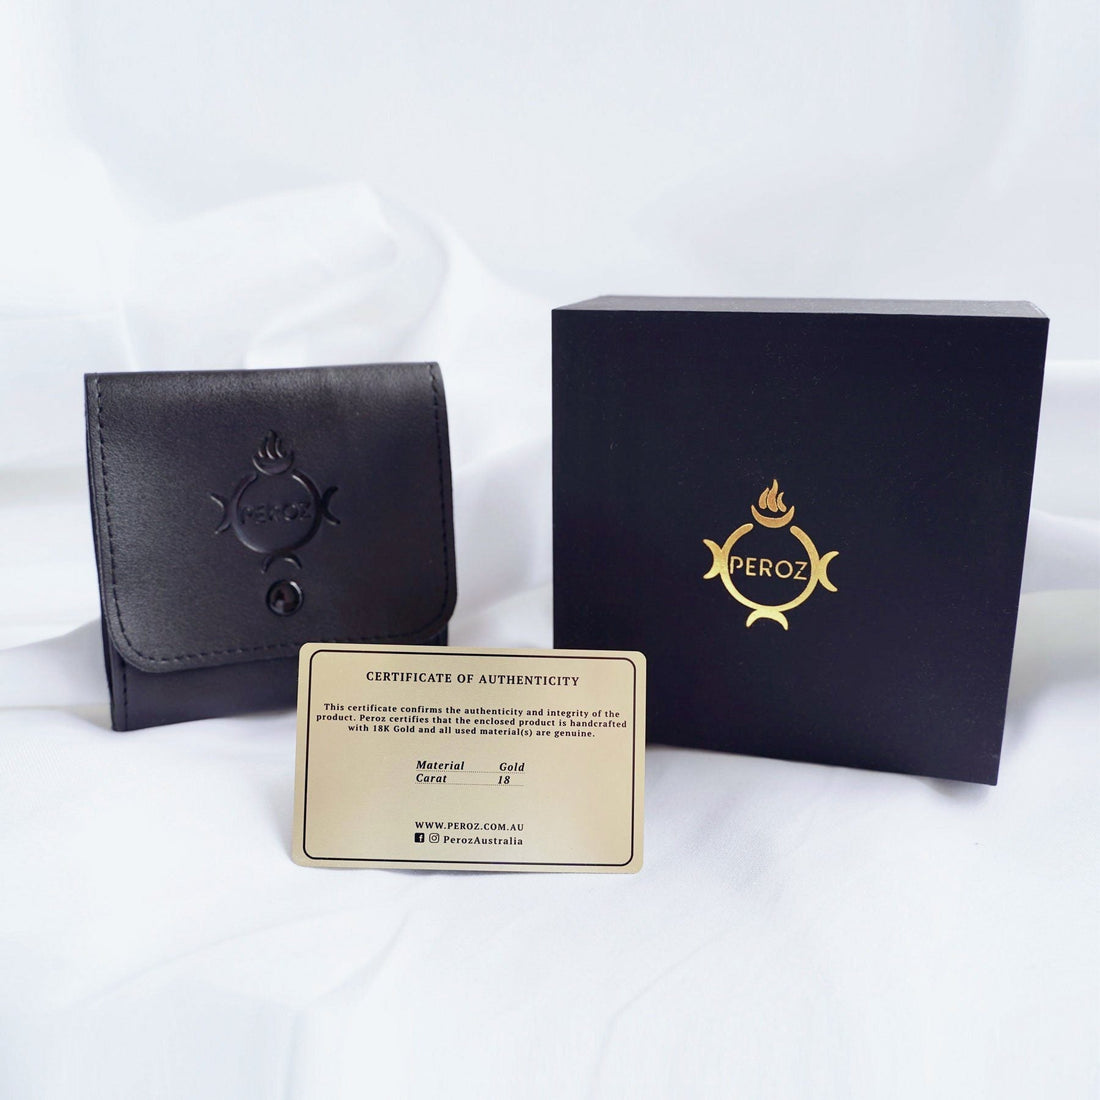 Dota Leather Bracelet Packaging - Peroz accessories